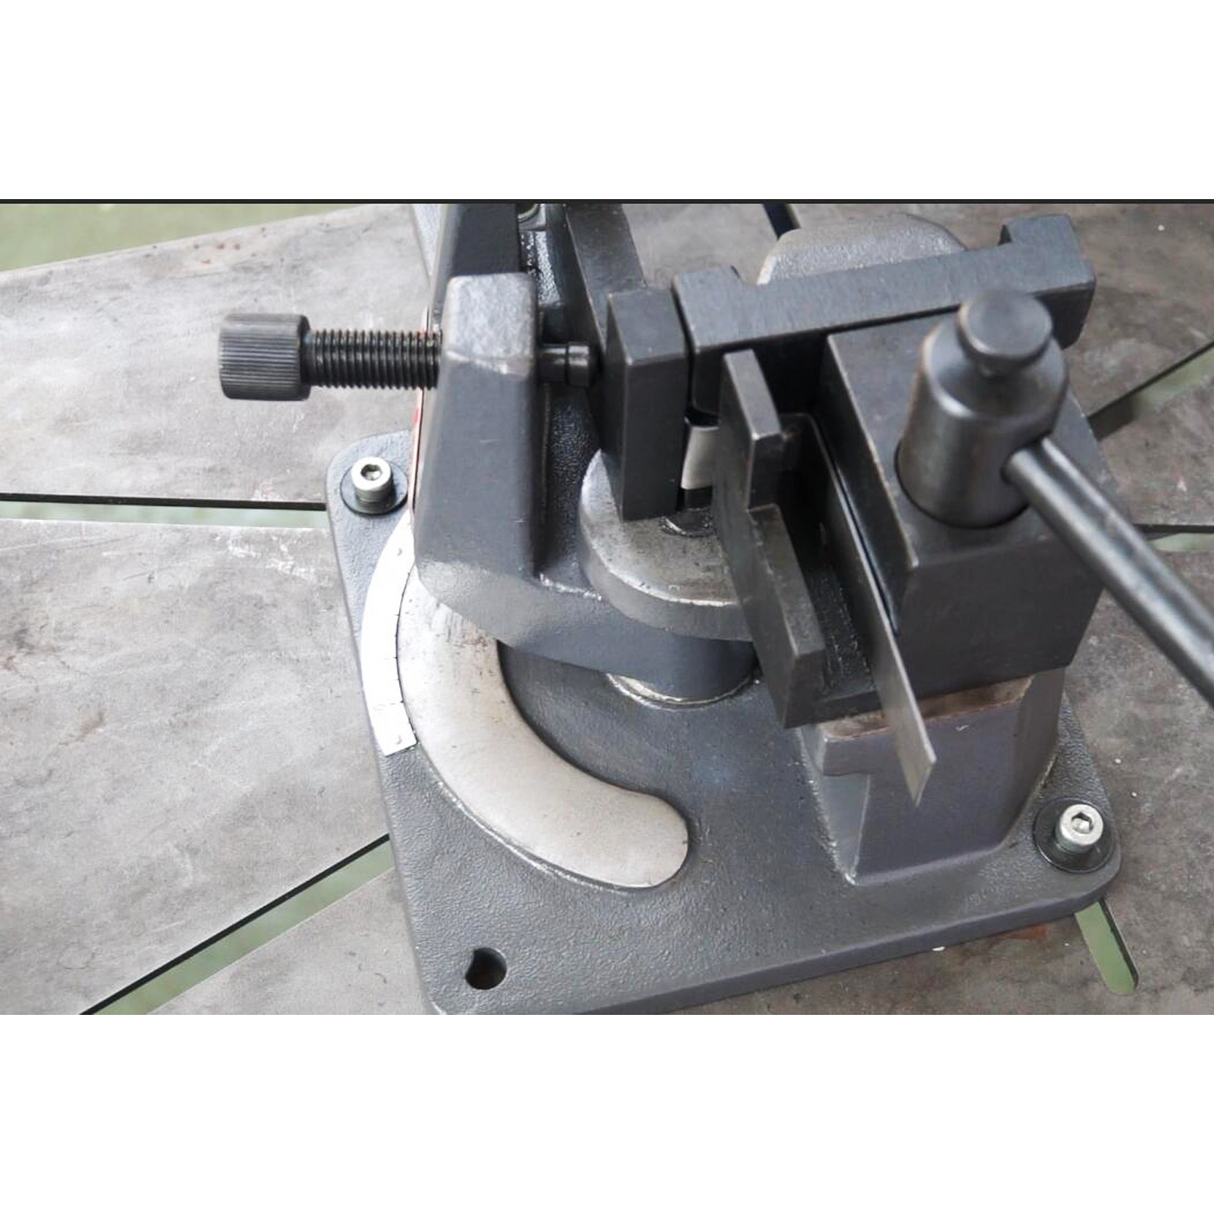 Hot and Cold Bending: Whether you need to bend flat, round, square, or angle steel, this bender can handle it all with ease.